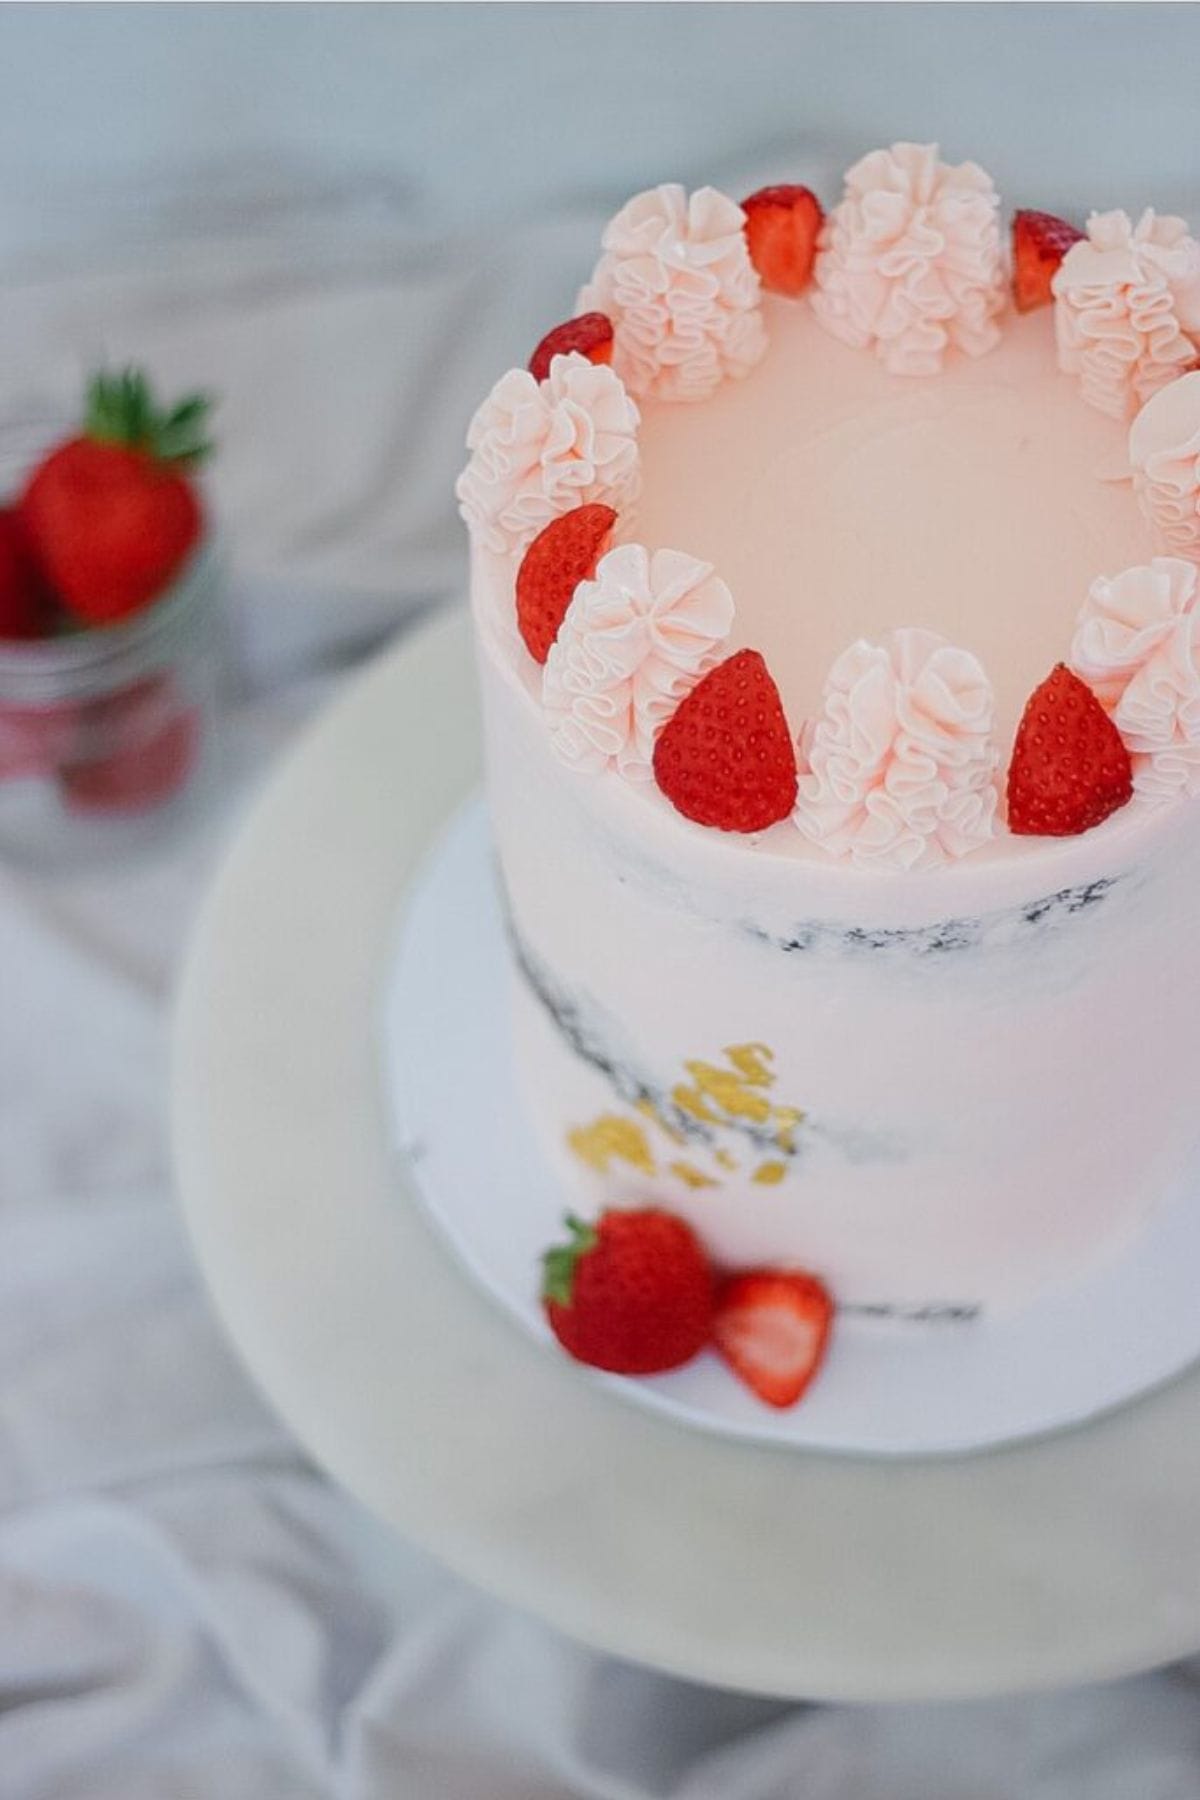 showing the top of the rose buttercream cake with strawberry pieces on top